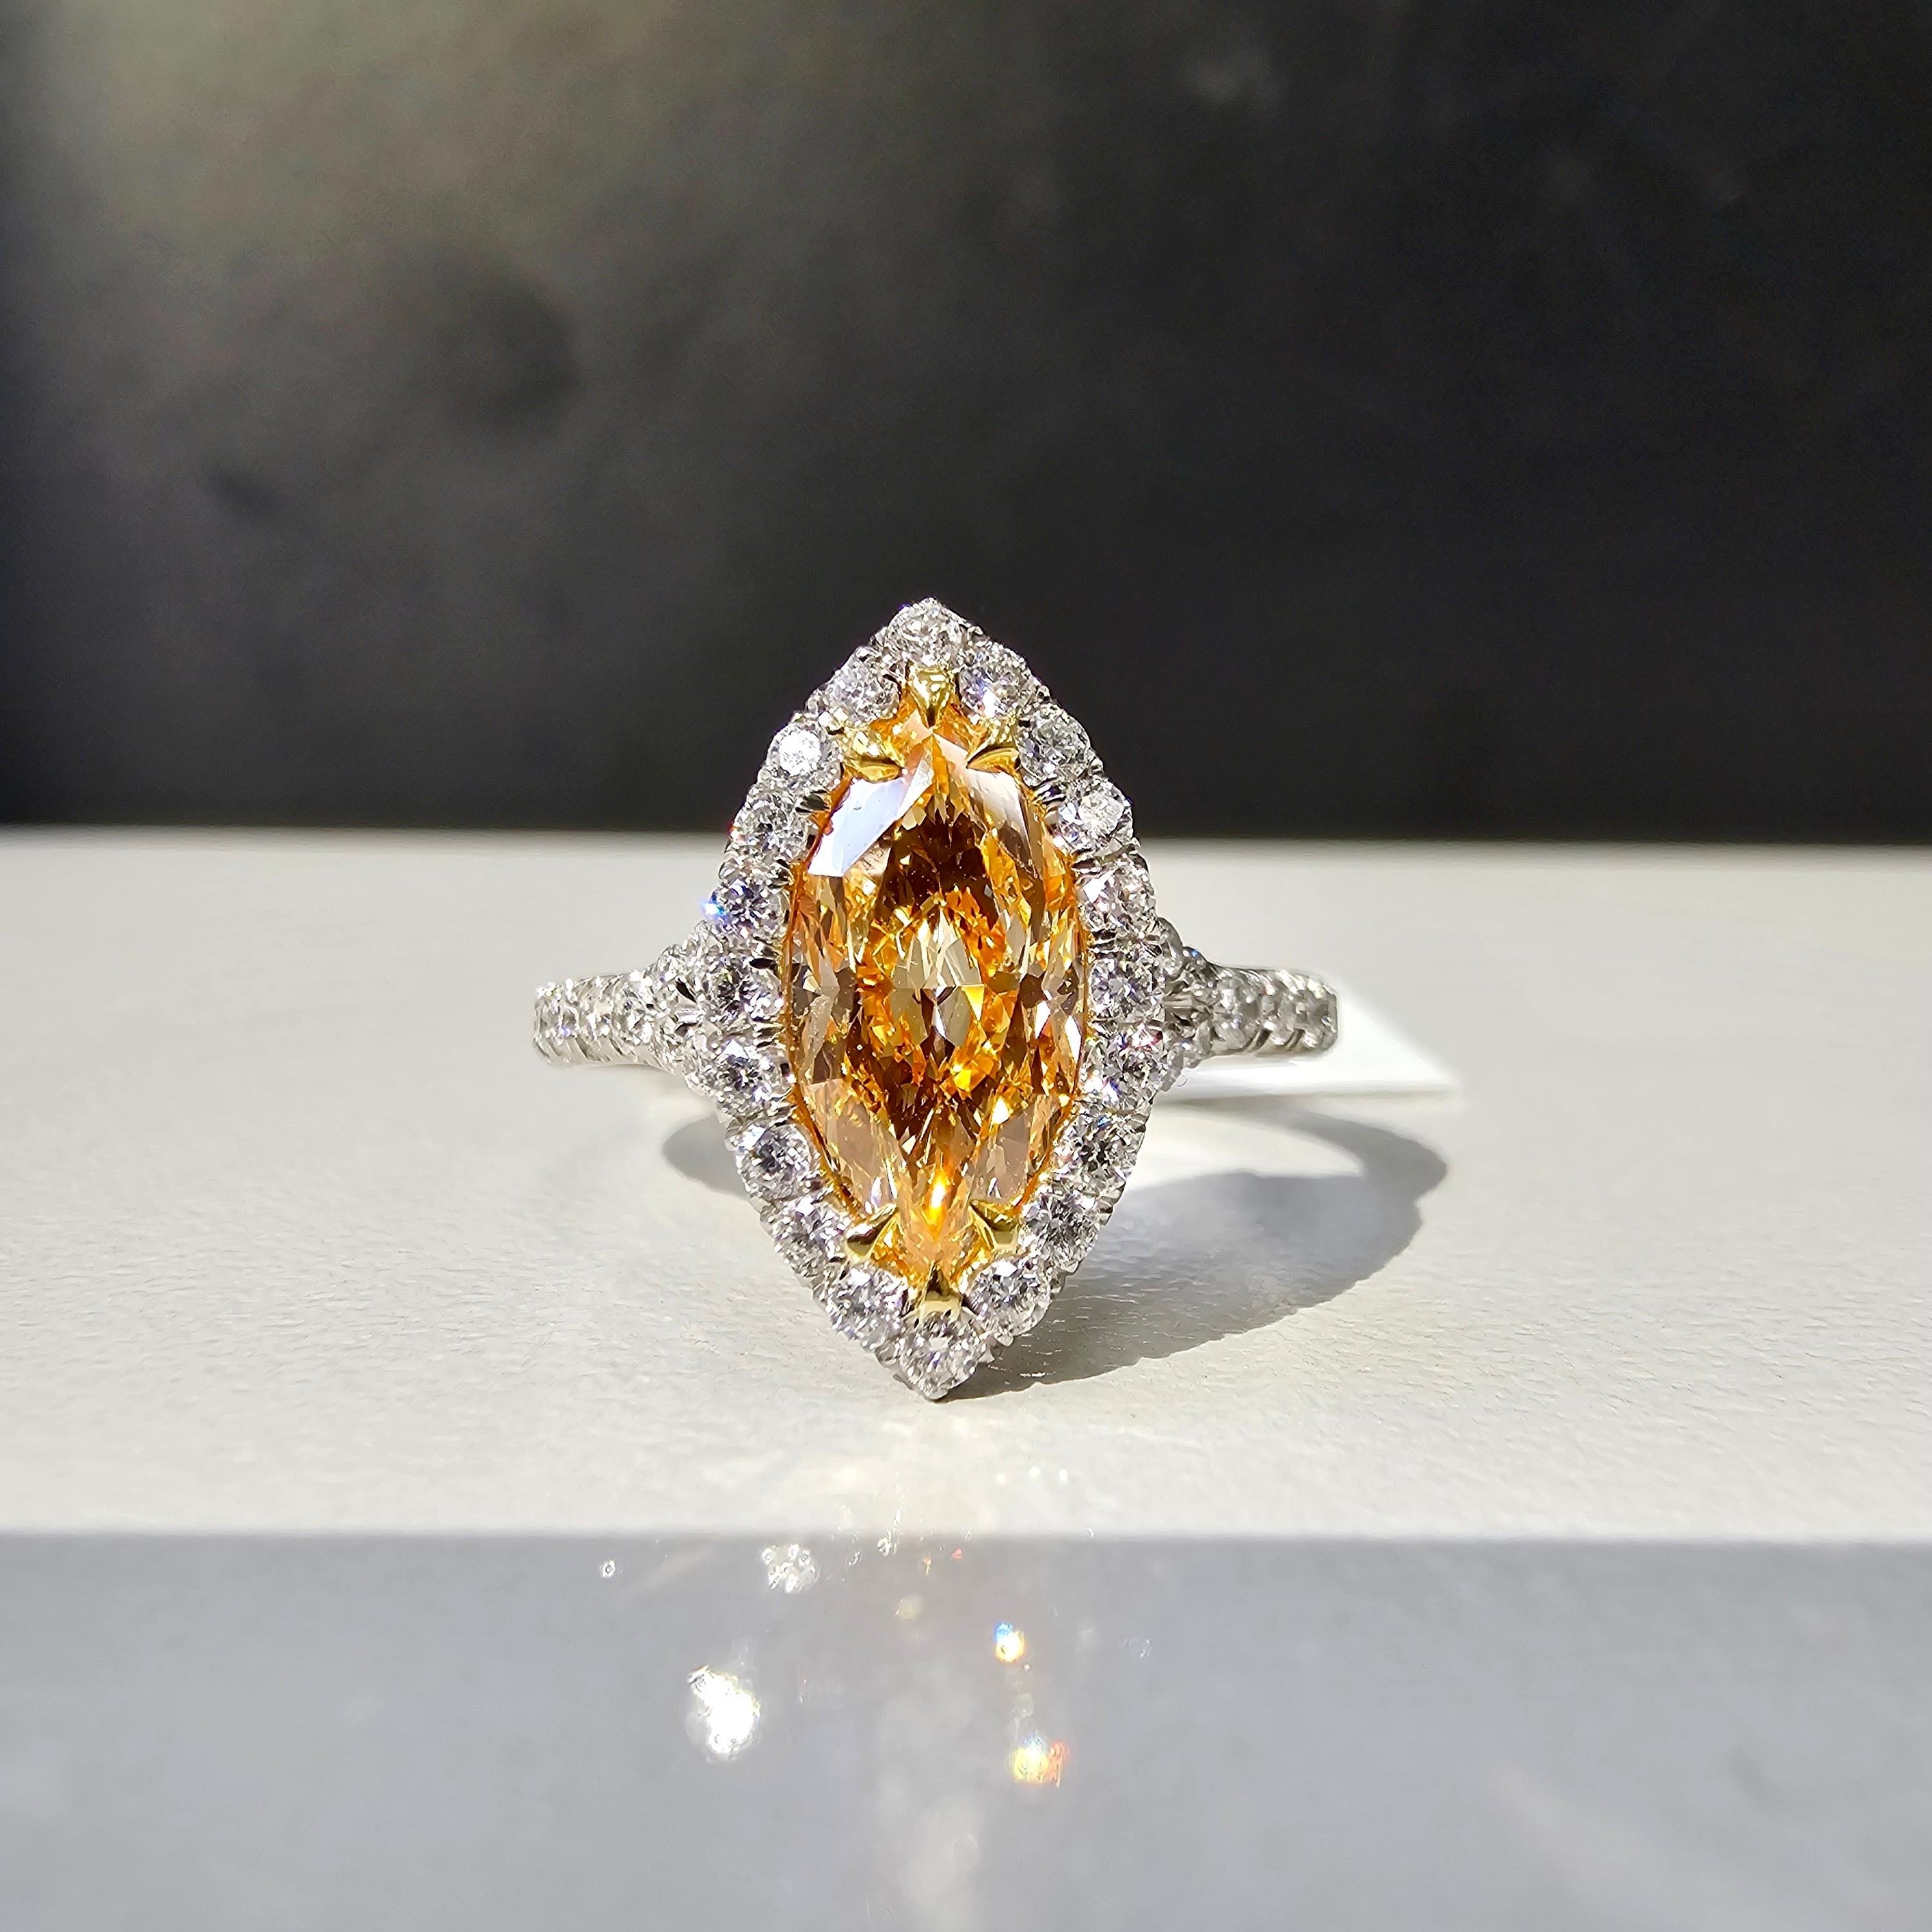 Beautiful Marquise Orange diamond set in a delicate Platinum ring with 0.62ct of rounds
The diamond faces up predominantly orange

Making Extraordinary Attainable with Rare Colors
